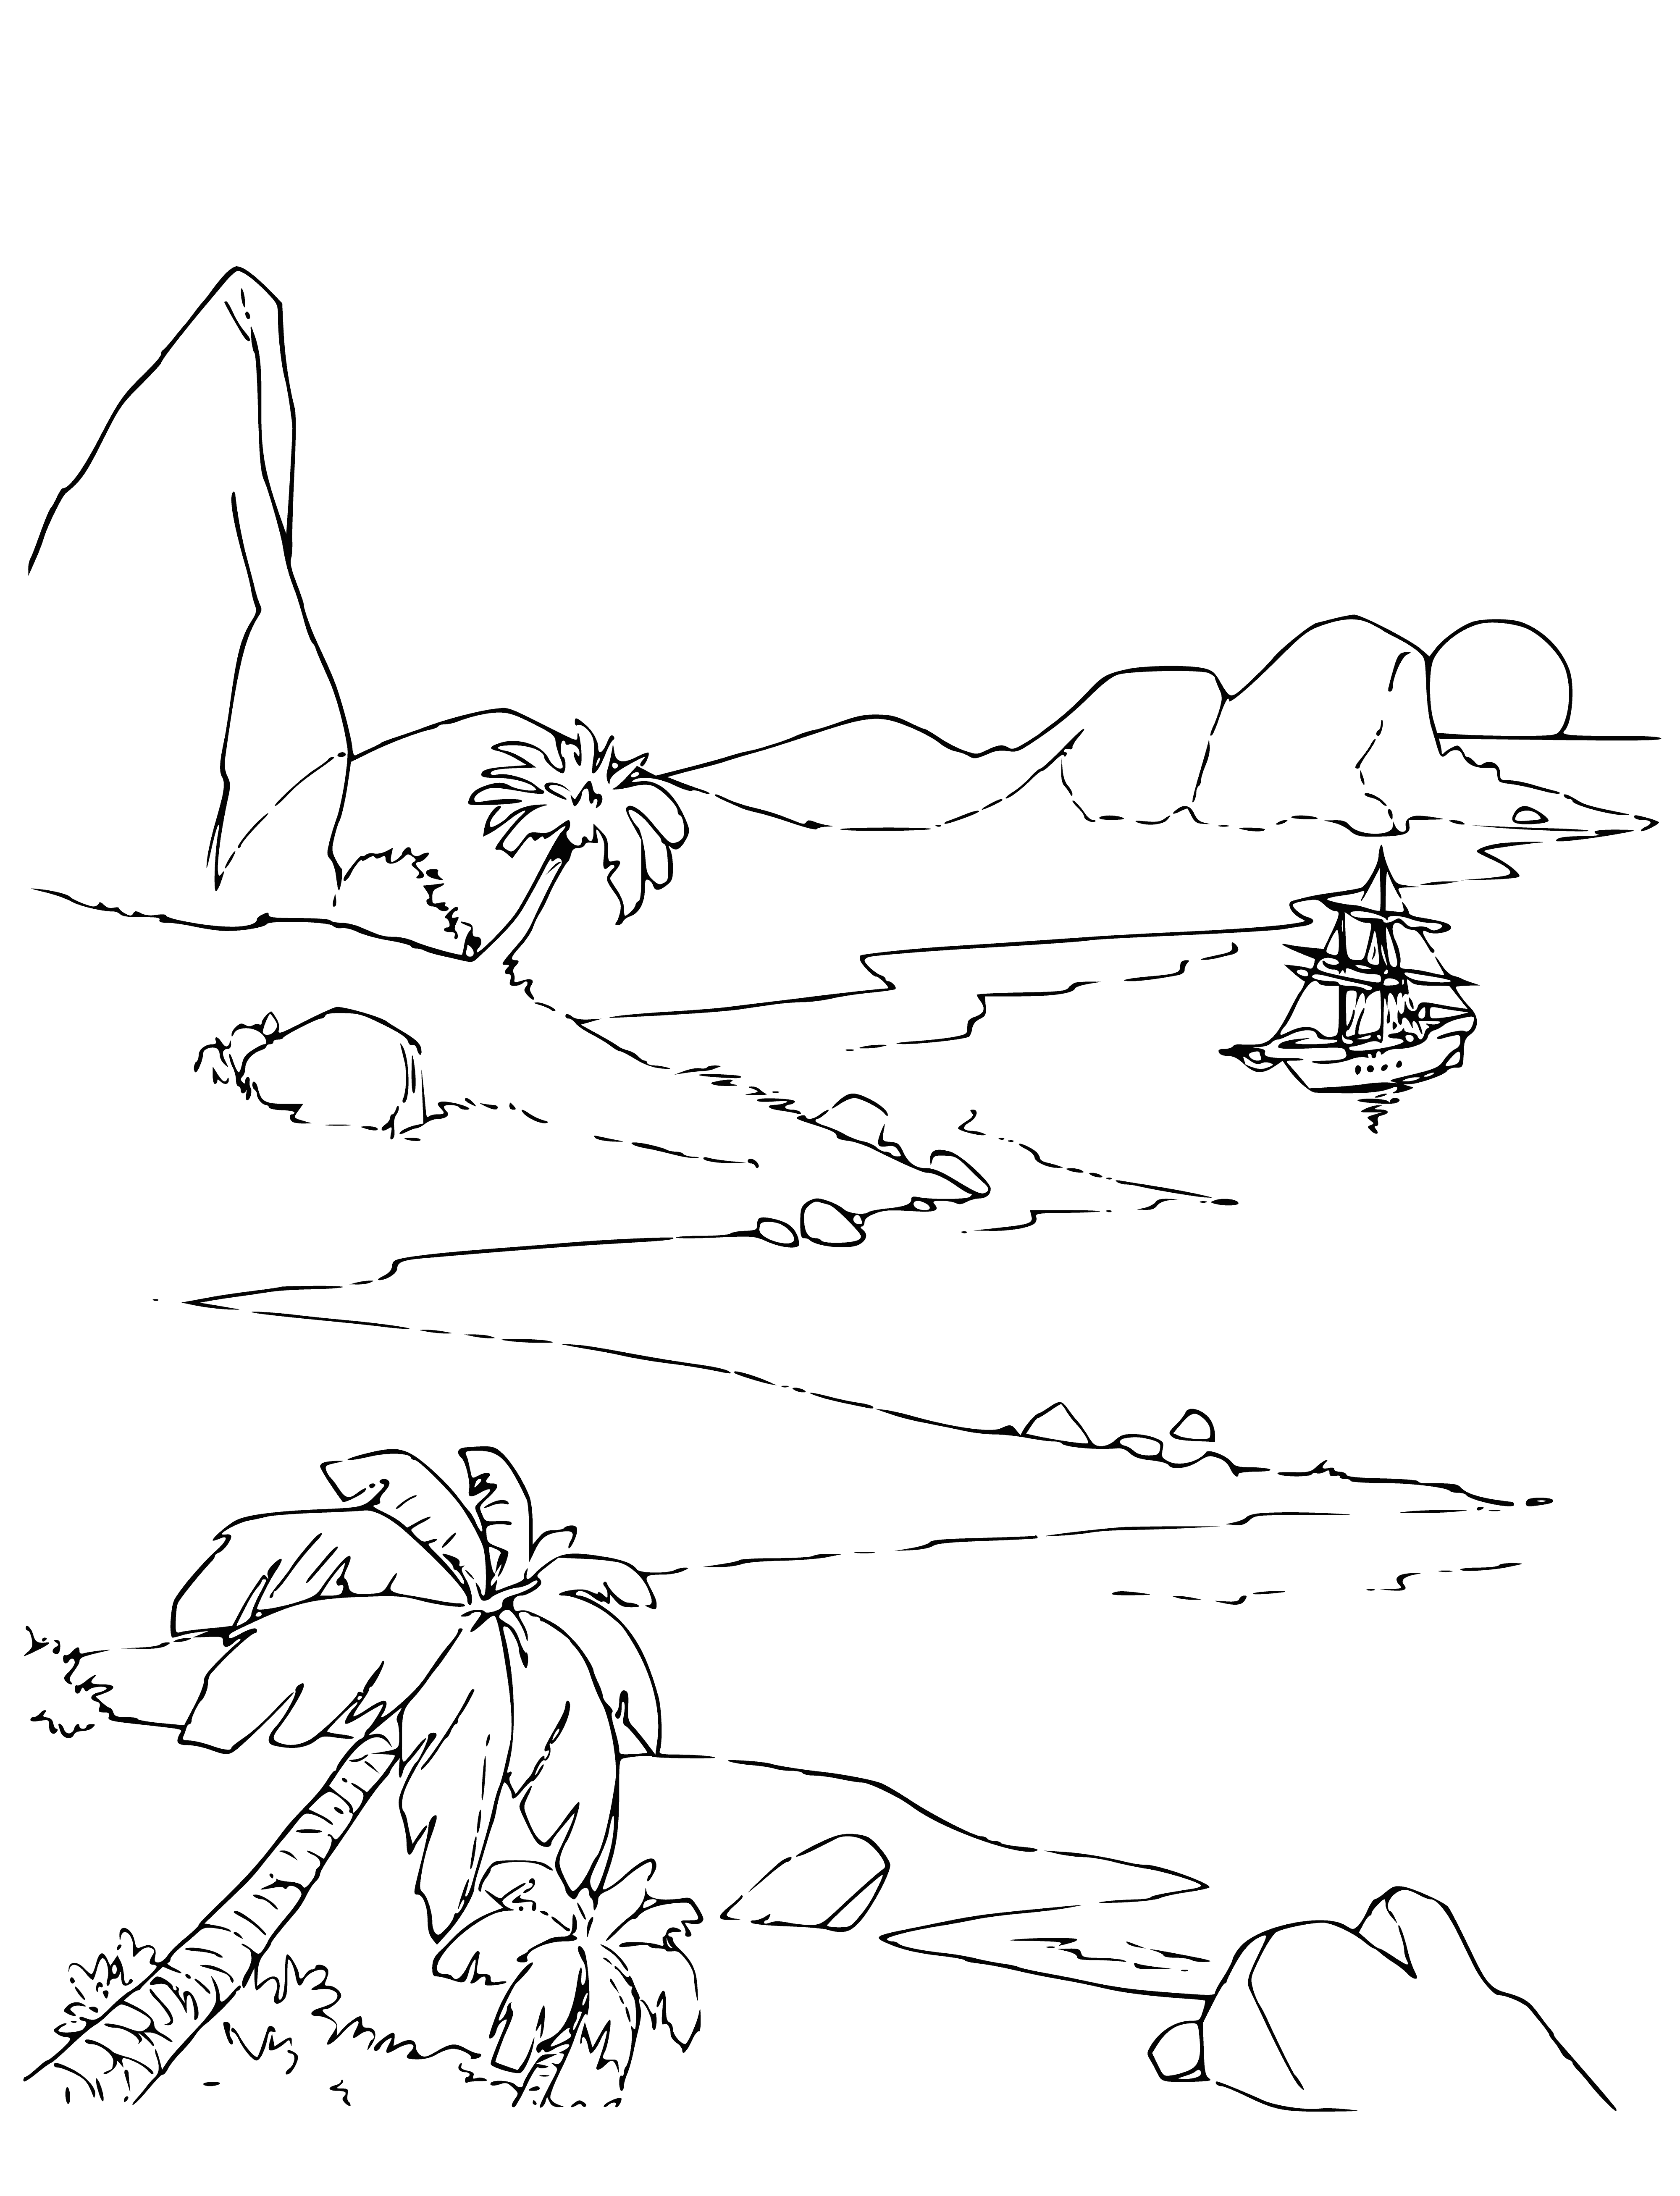 coloring page: Uninhabited island has rocky land, patches of grass, trees, and a body of water. #islandlife